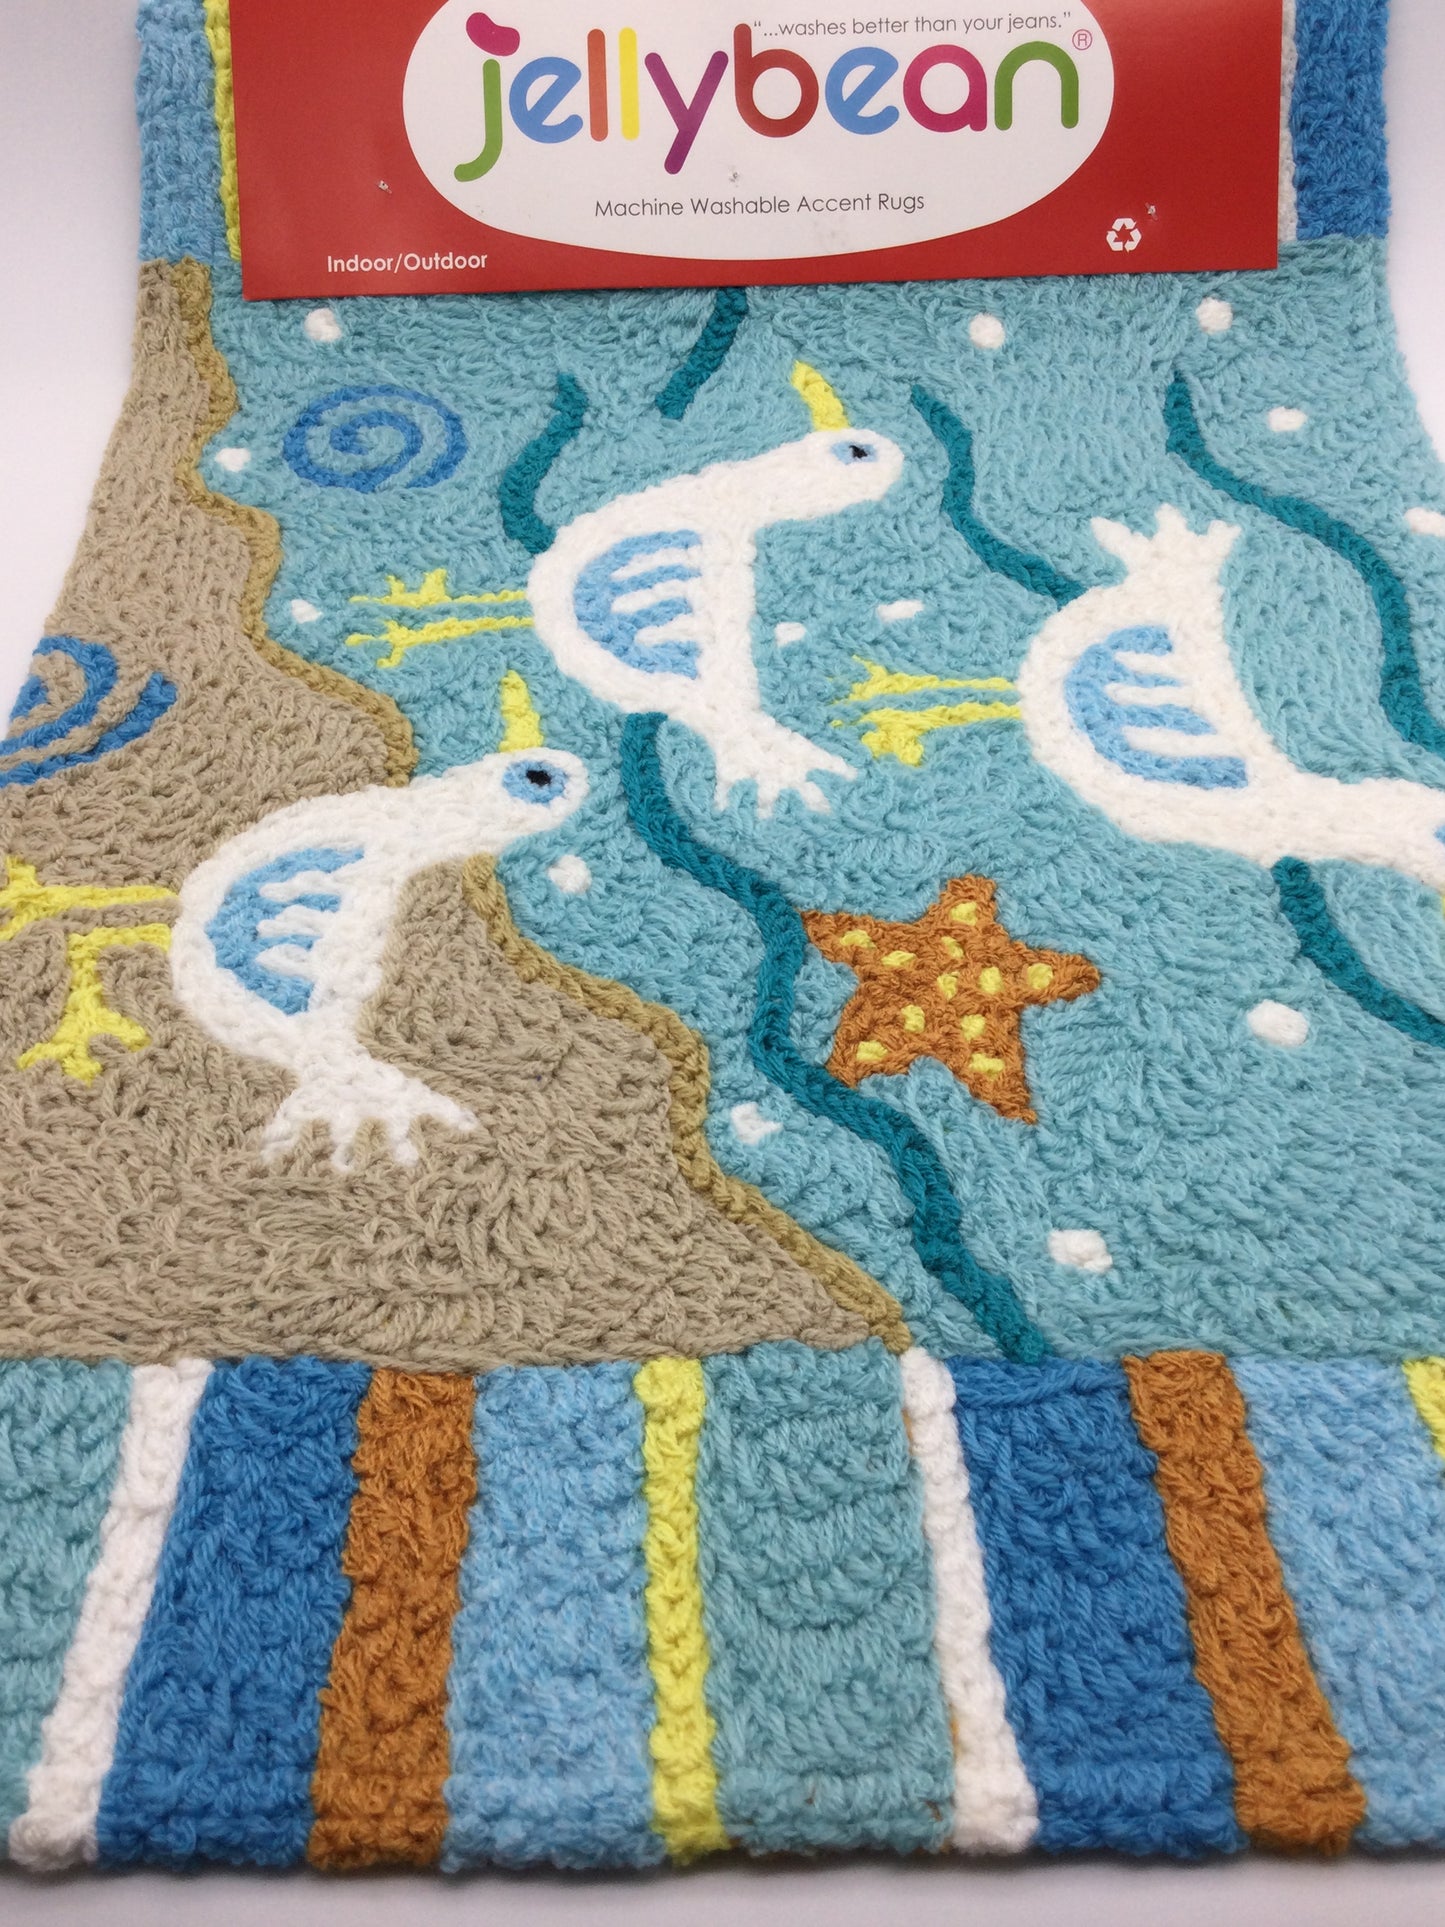 Jelly Bean Washable Indoor/Outdoor Carpets - Sassy Seagulls